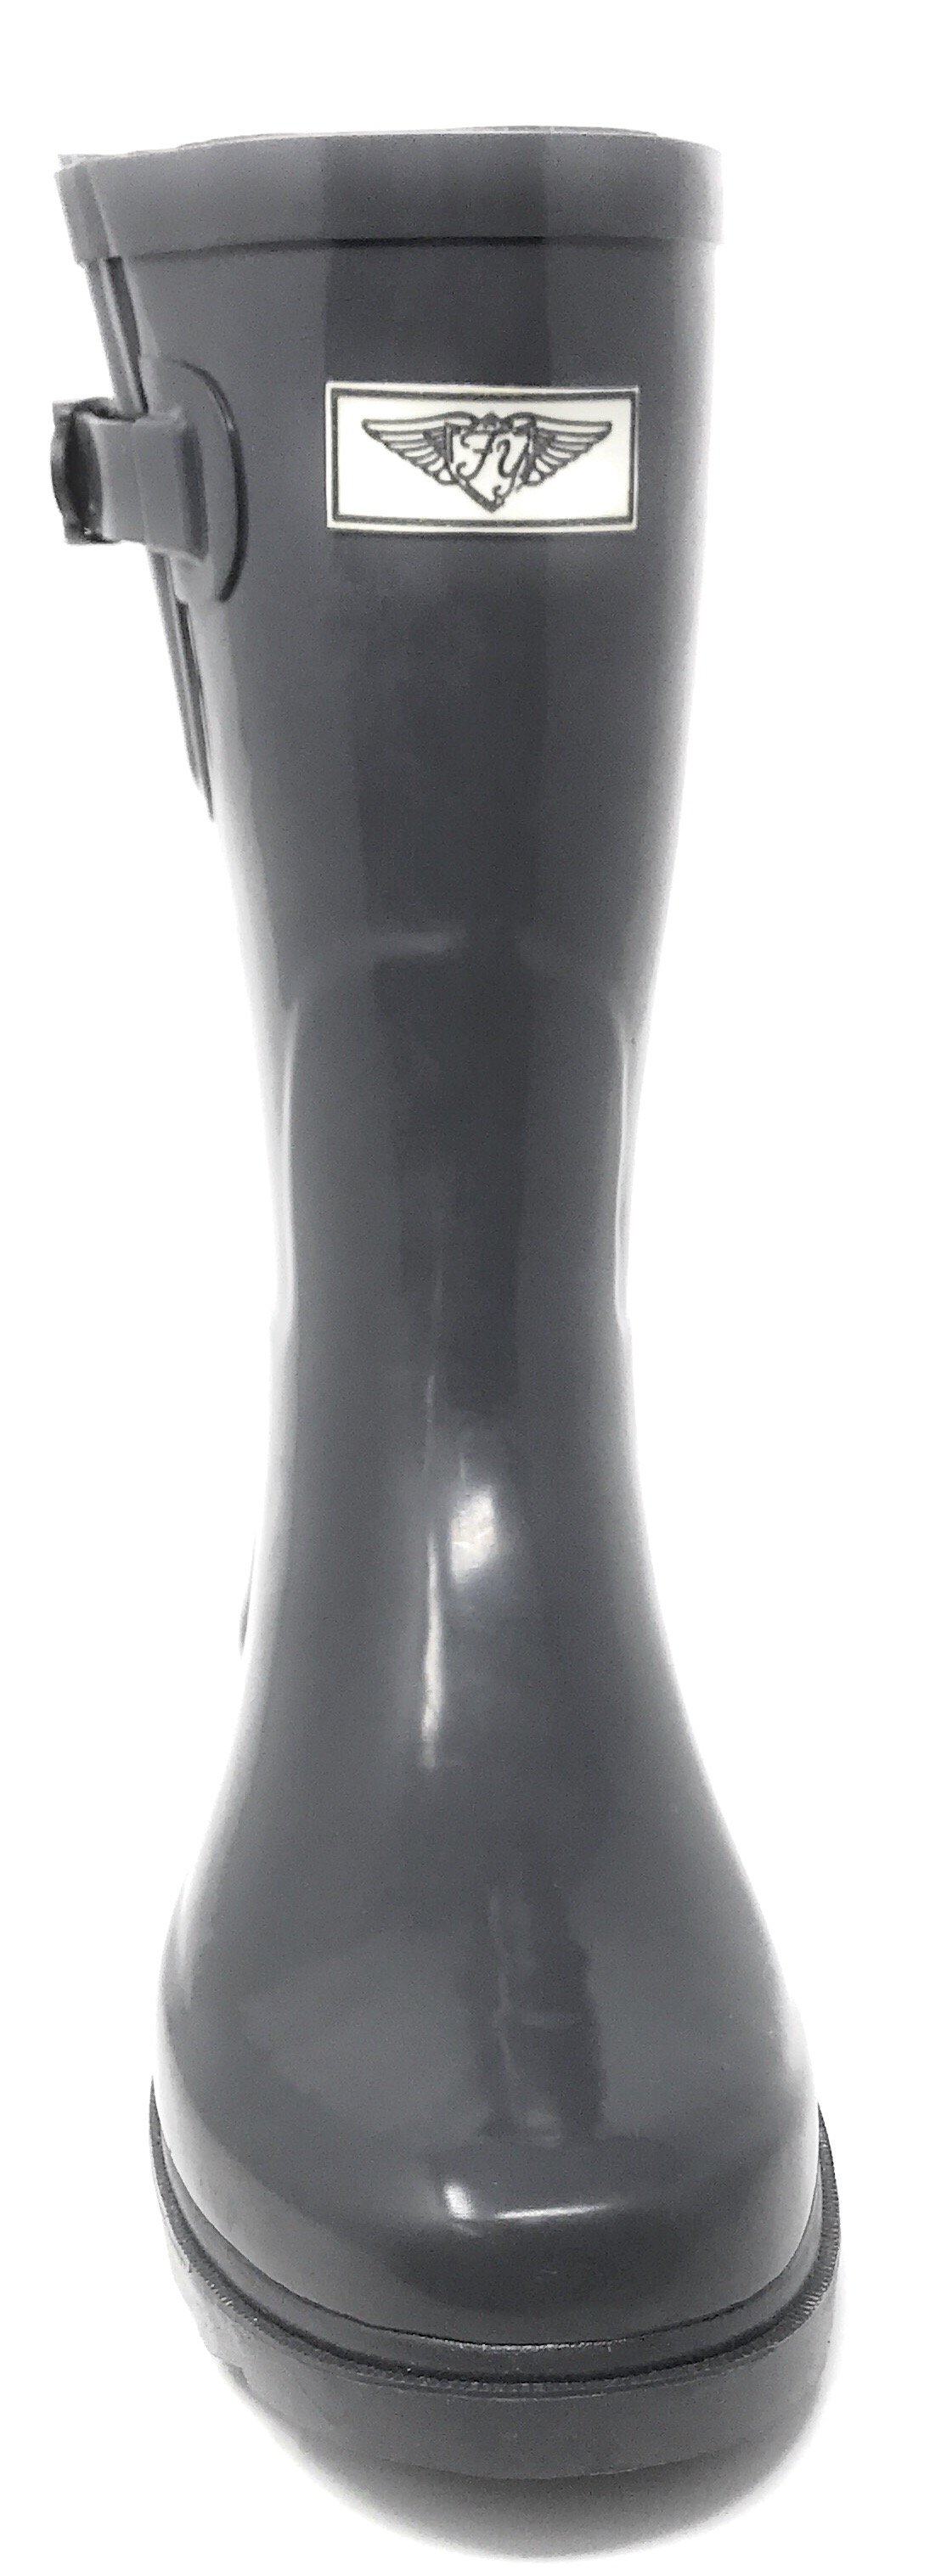 Forever Young Women's Short Shaft Rain Boots - image 3 of 5